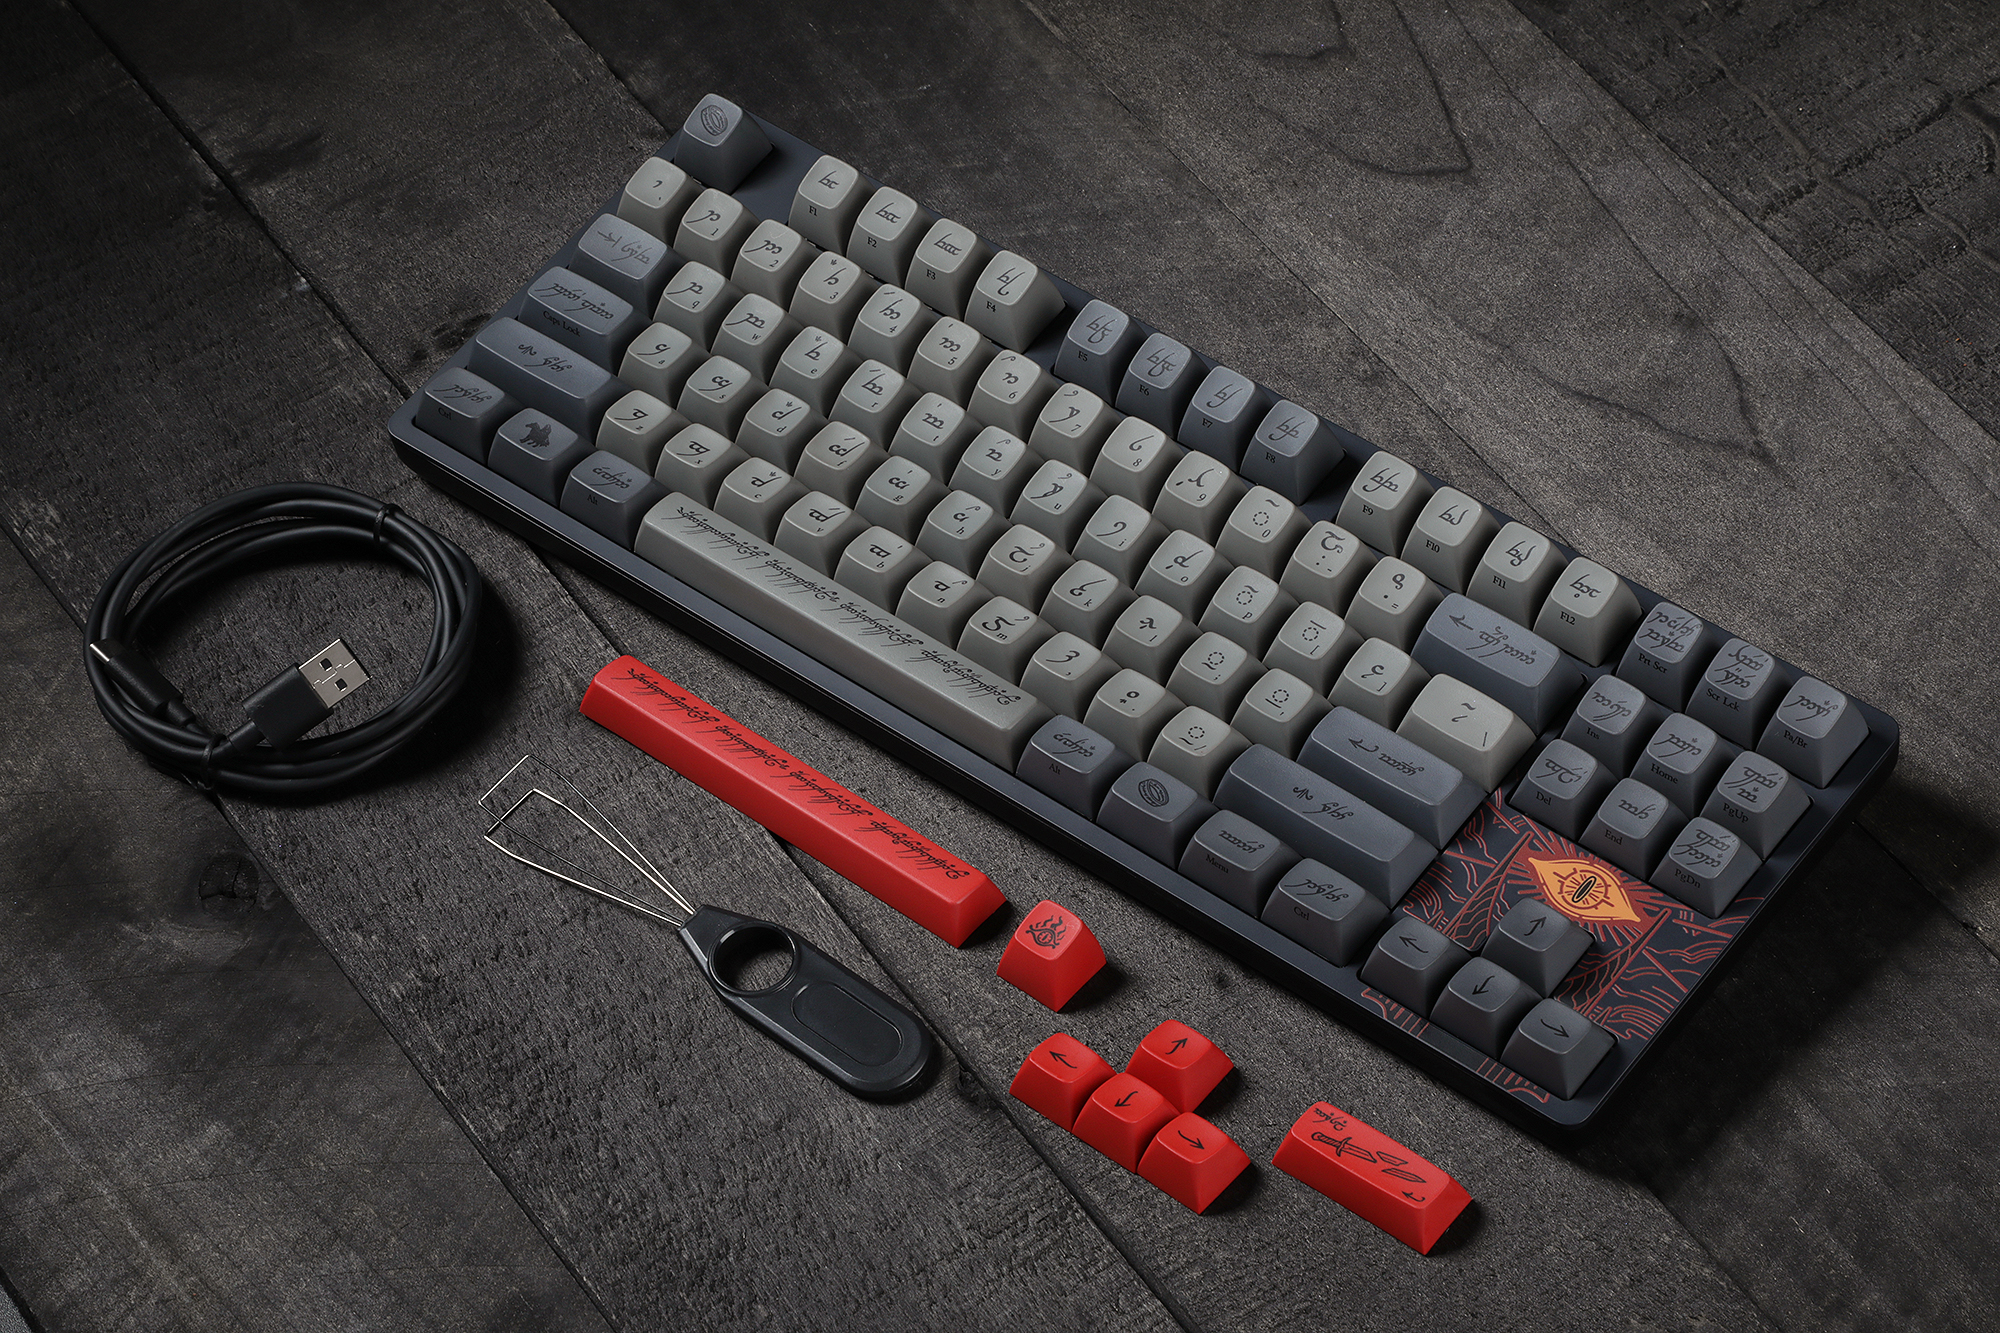 Drop's new Lord of the Rings keyboard